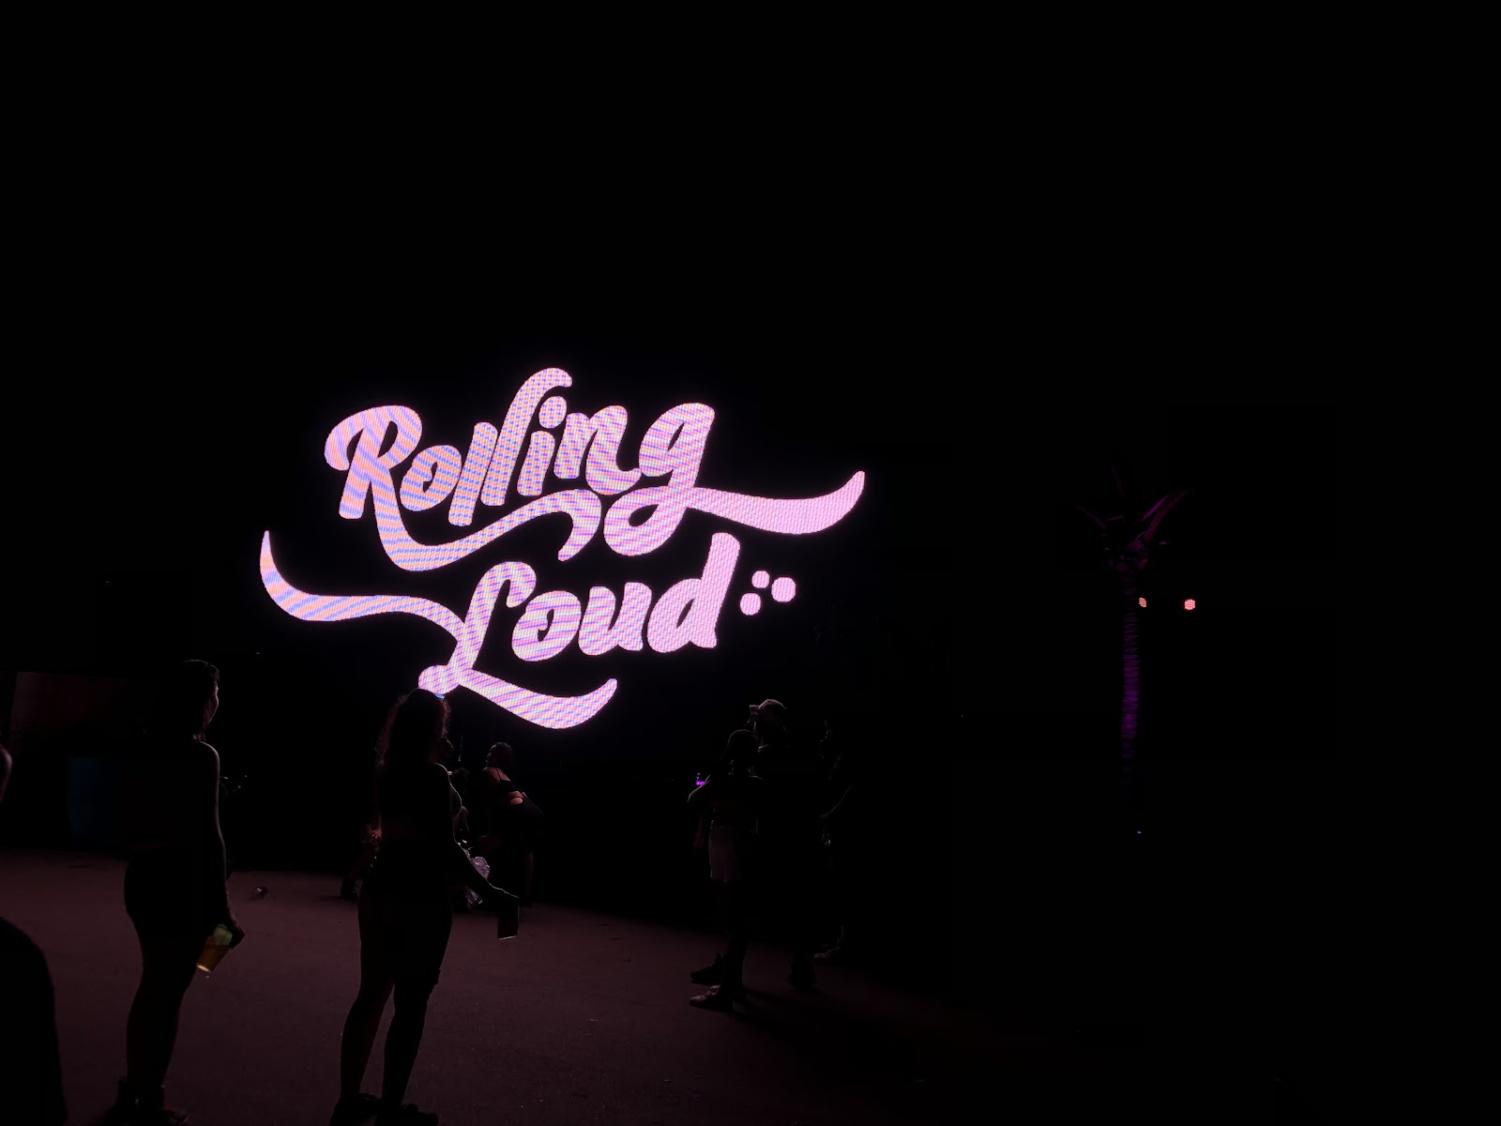 A$AP Rocky & 21 Savage Both Had Issues at Rolling Loud New York